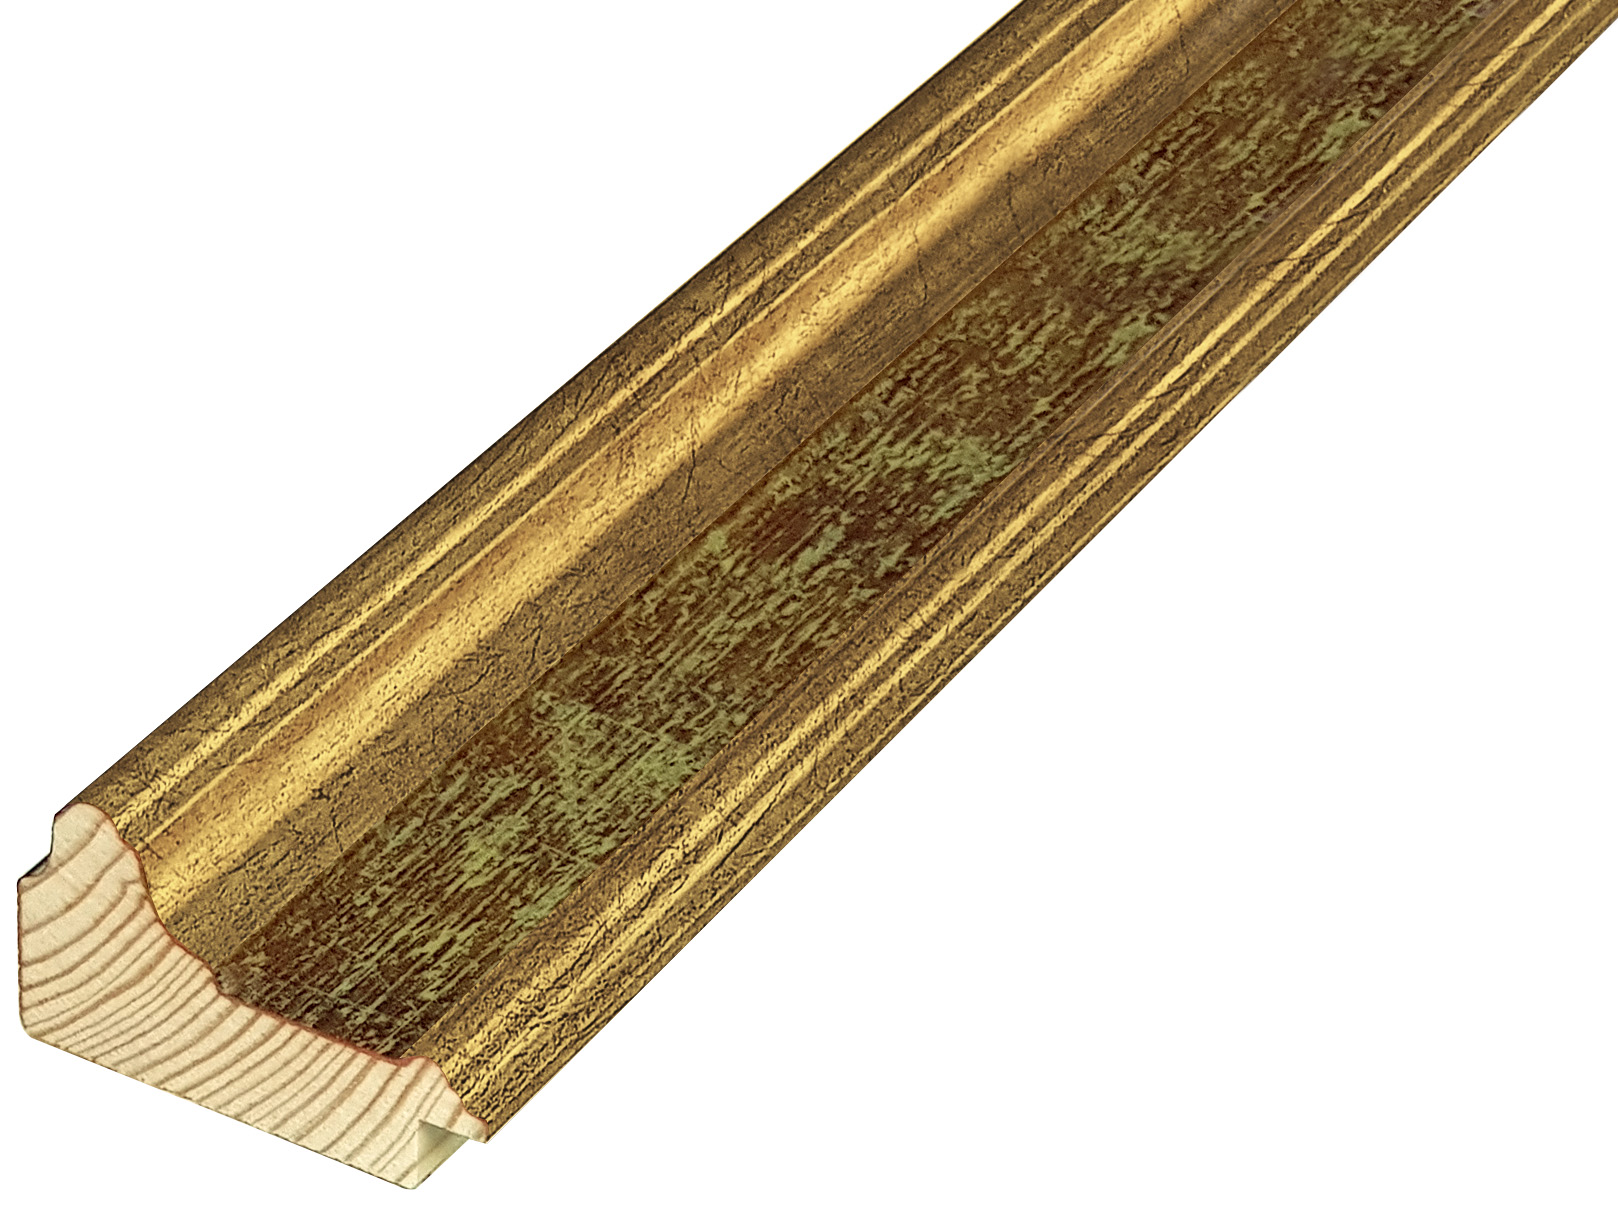 Moulding fingerjointed pine, widht 57mm, height 33mm - Gold - 436ORO